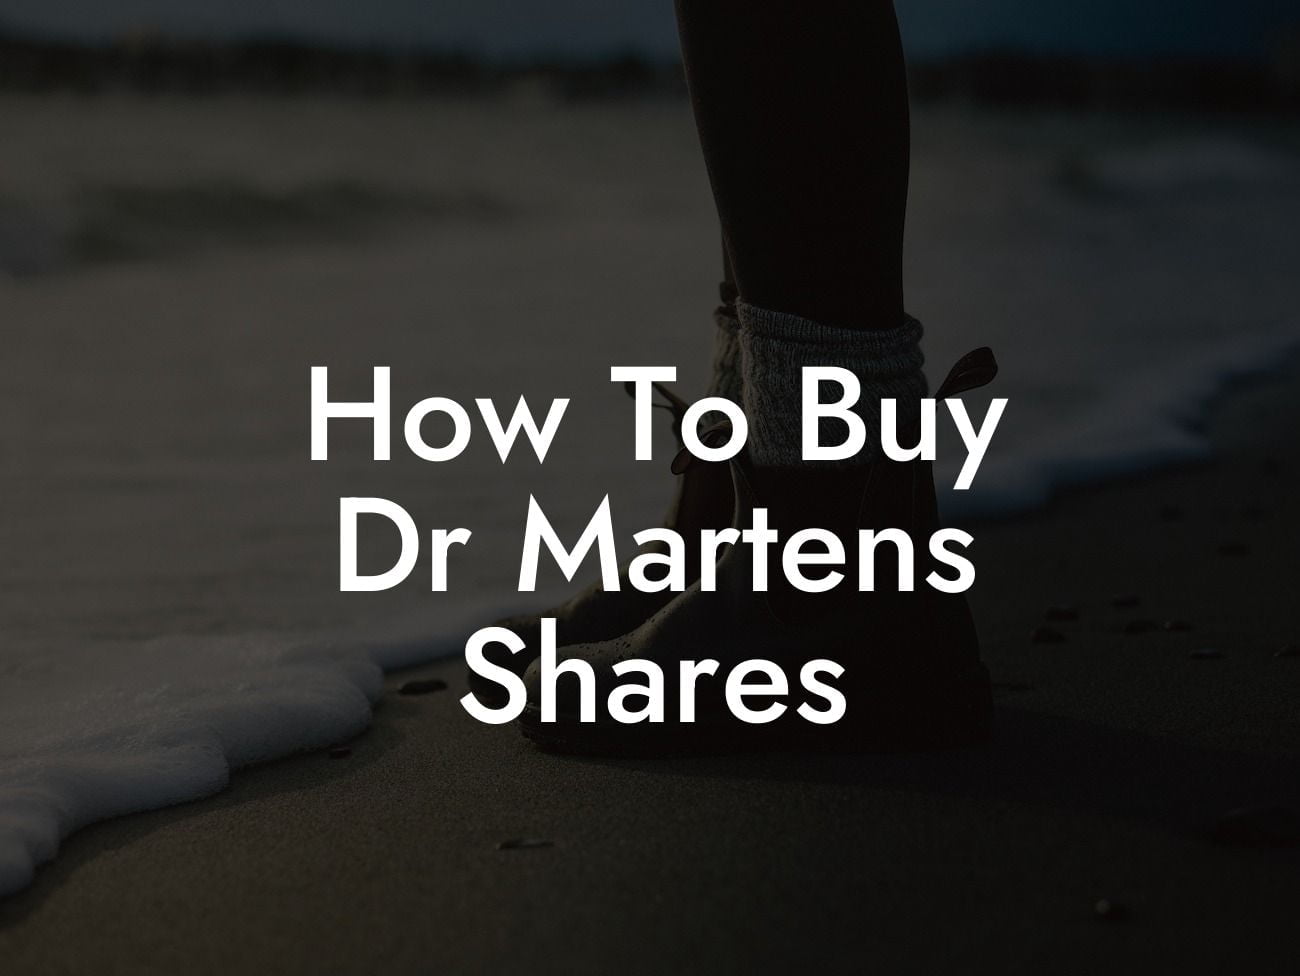 How To Buy Dr Martens Shares